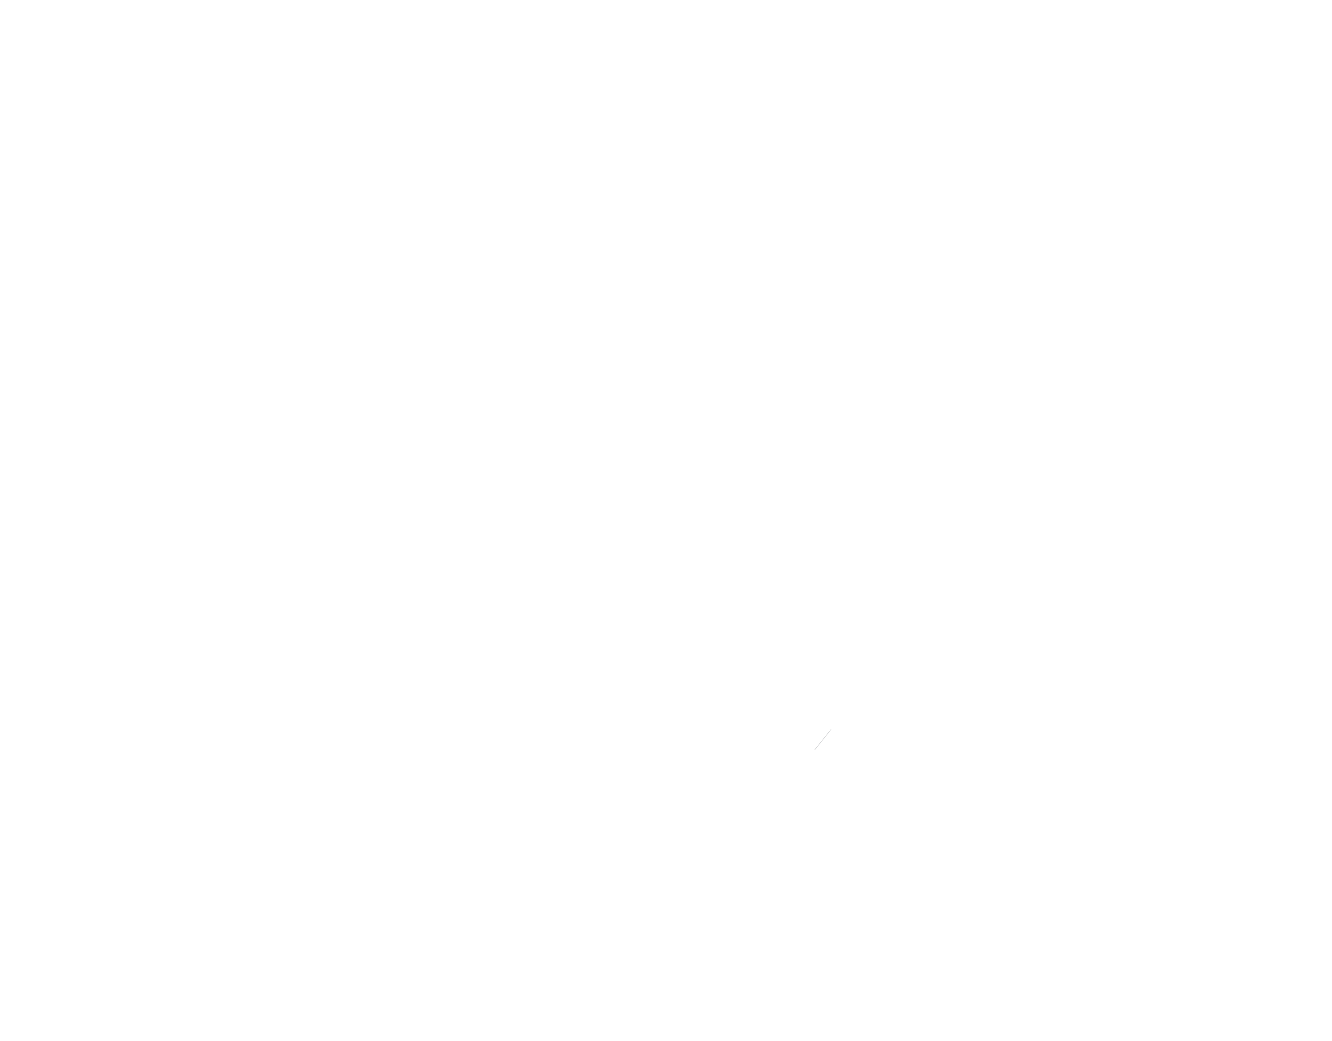 CFO Of The Year 2022